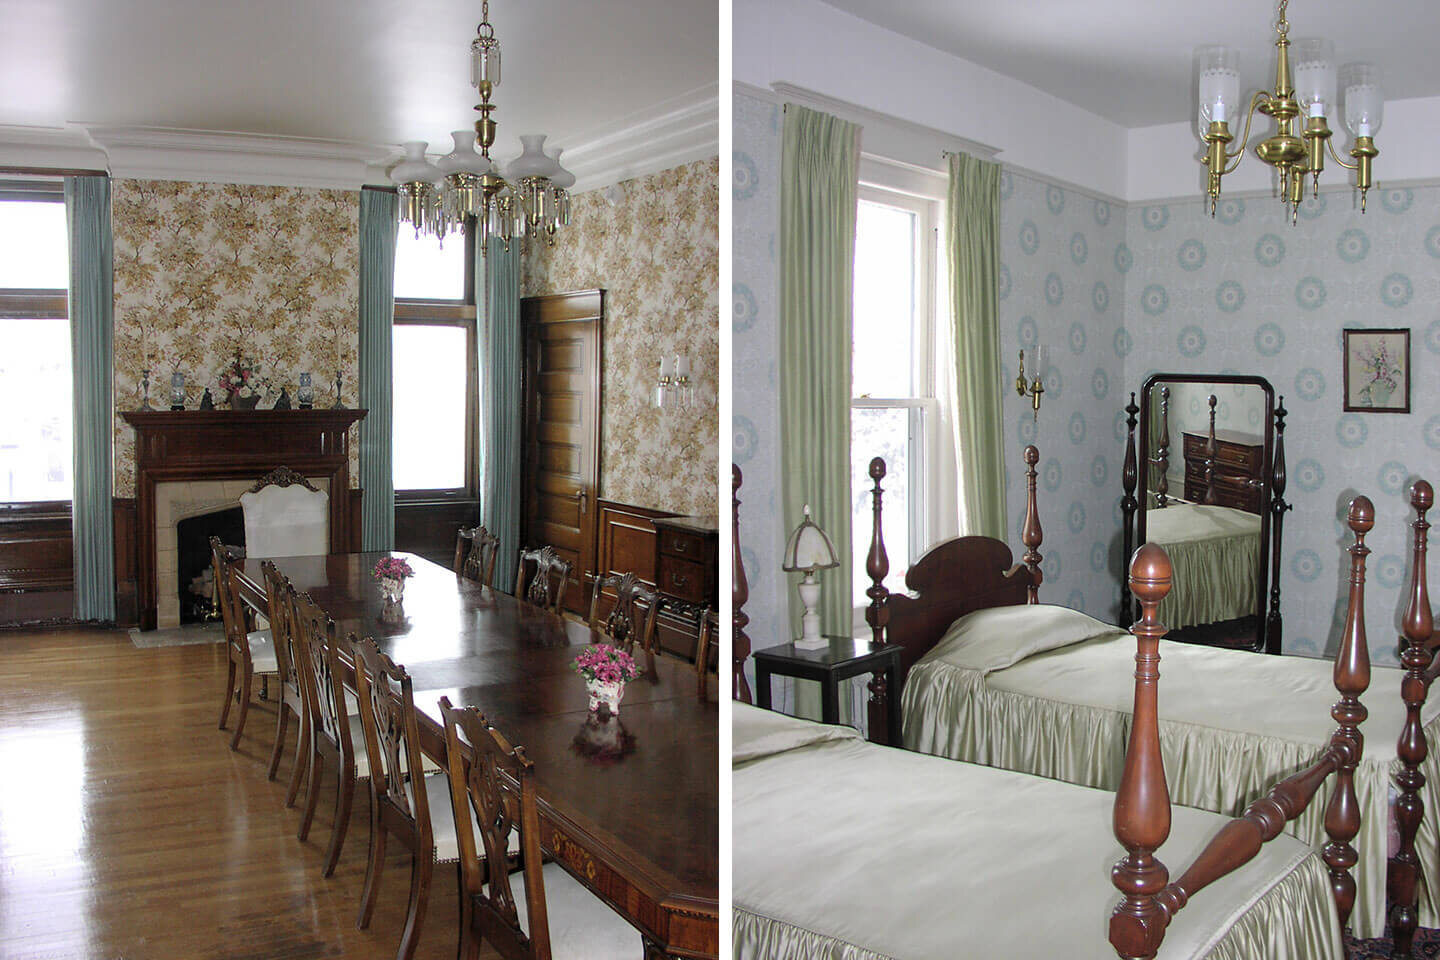 Historical dining room and bedroom